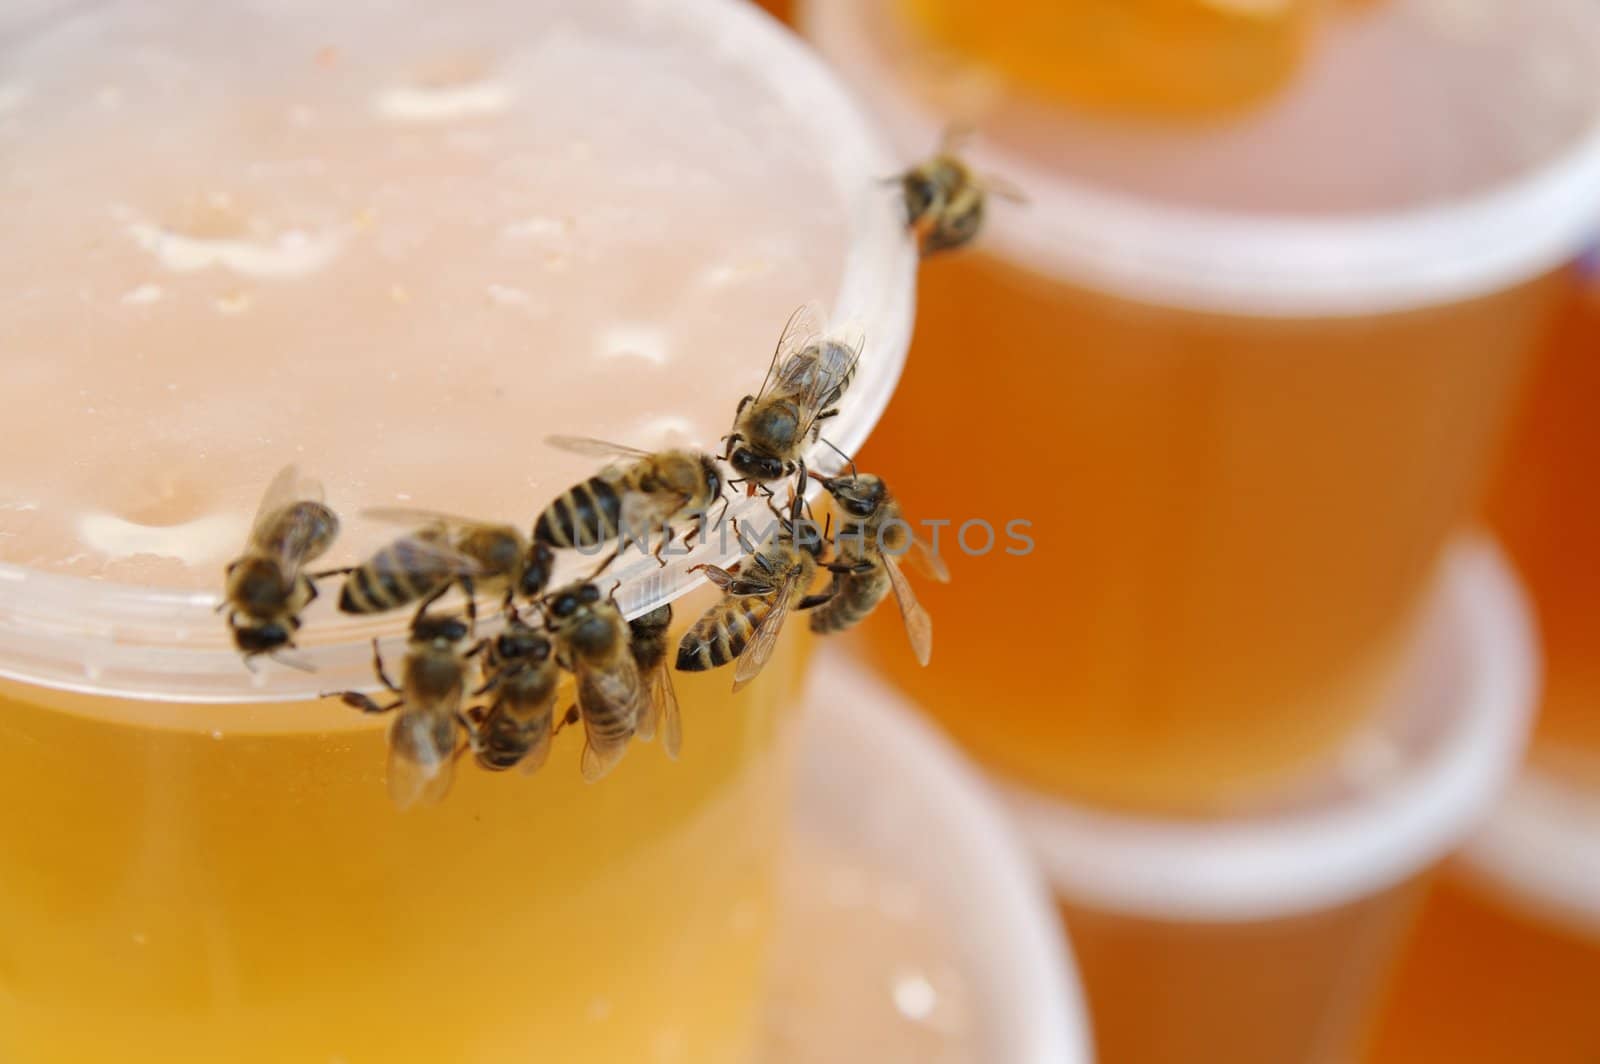 Group of bees eating honey on the pot